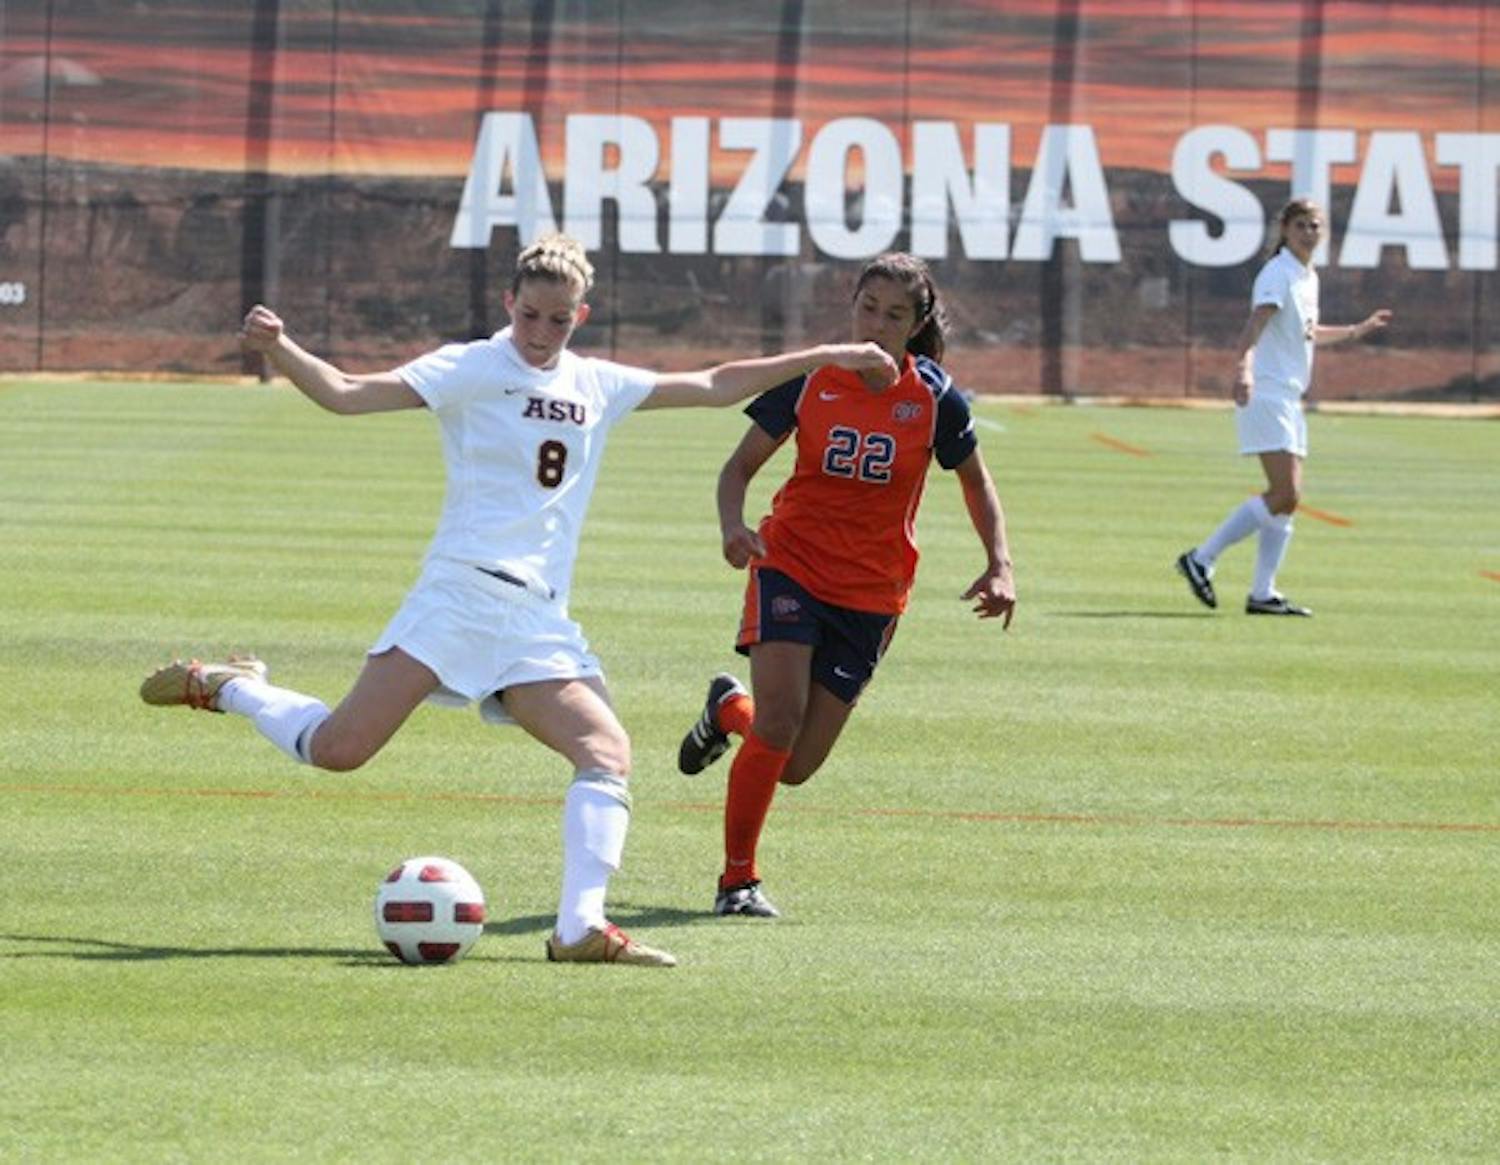 On display: ASU freshman forward Devin Marshall makes a cross during the Sun Devils’ spring exhibition game against UTEP on Saturday. ASU fell 1-0 in what was a closely contested match. (Photo by Elijah Grasser)